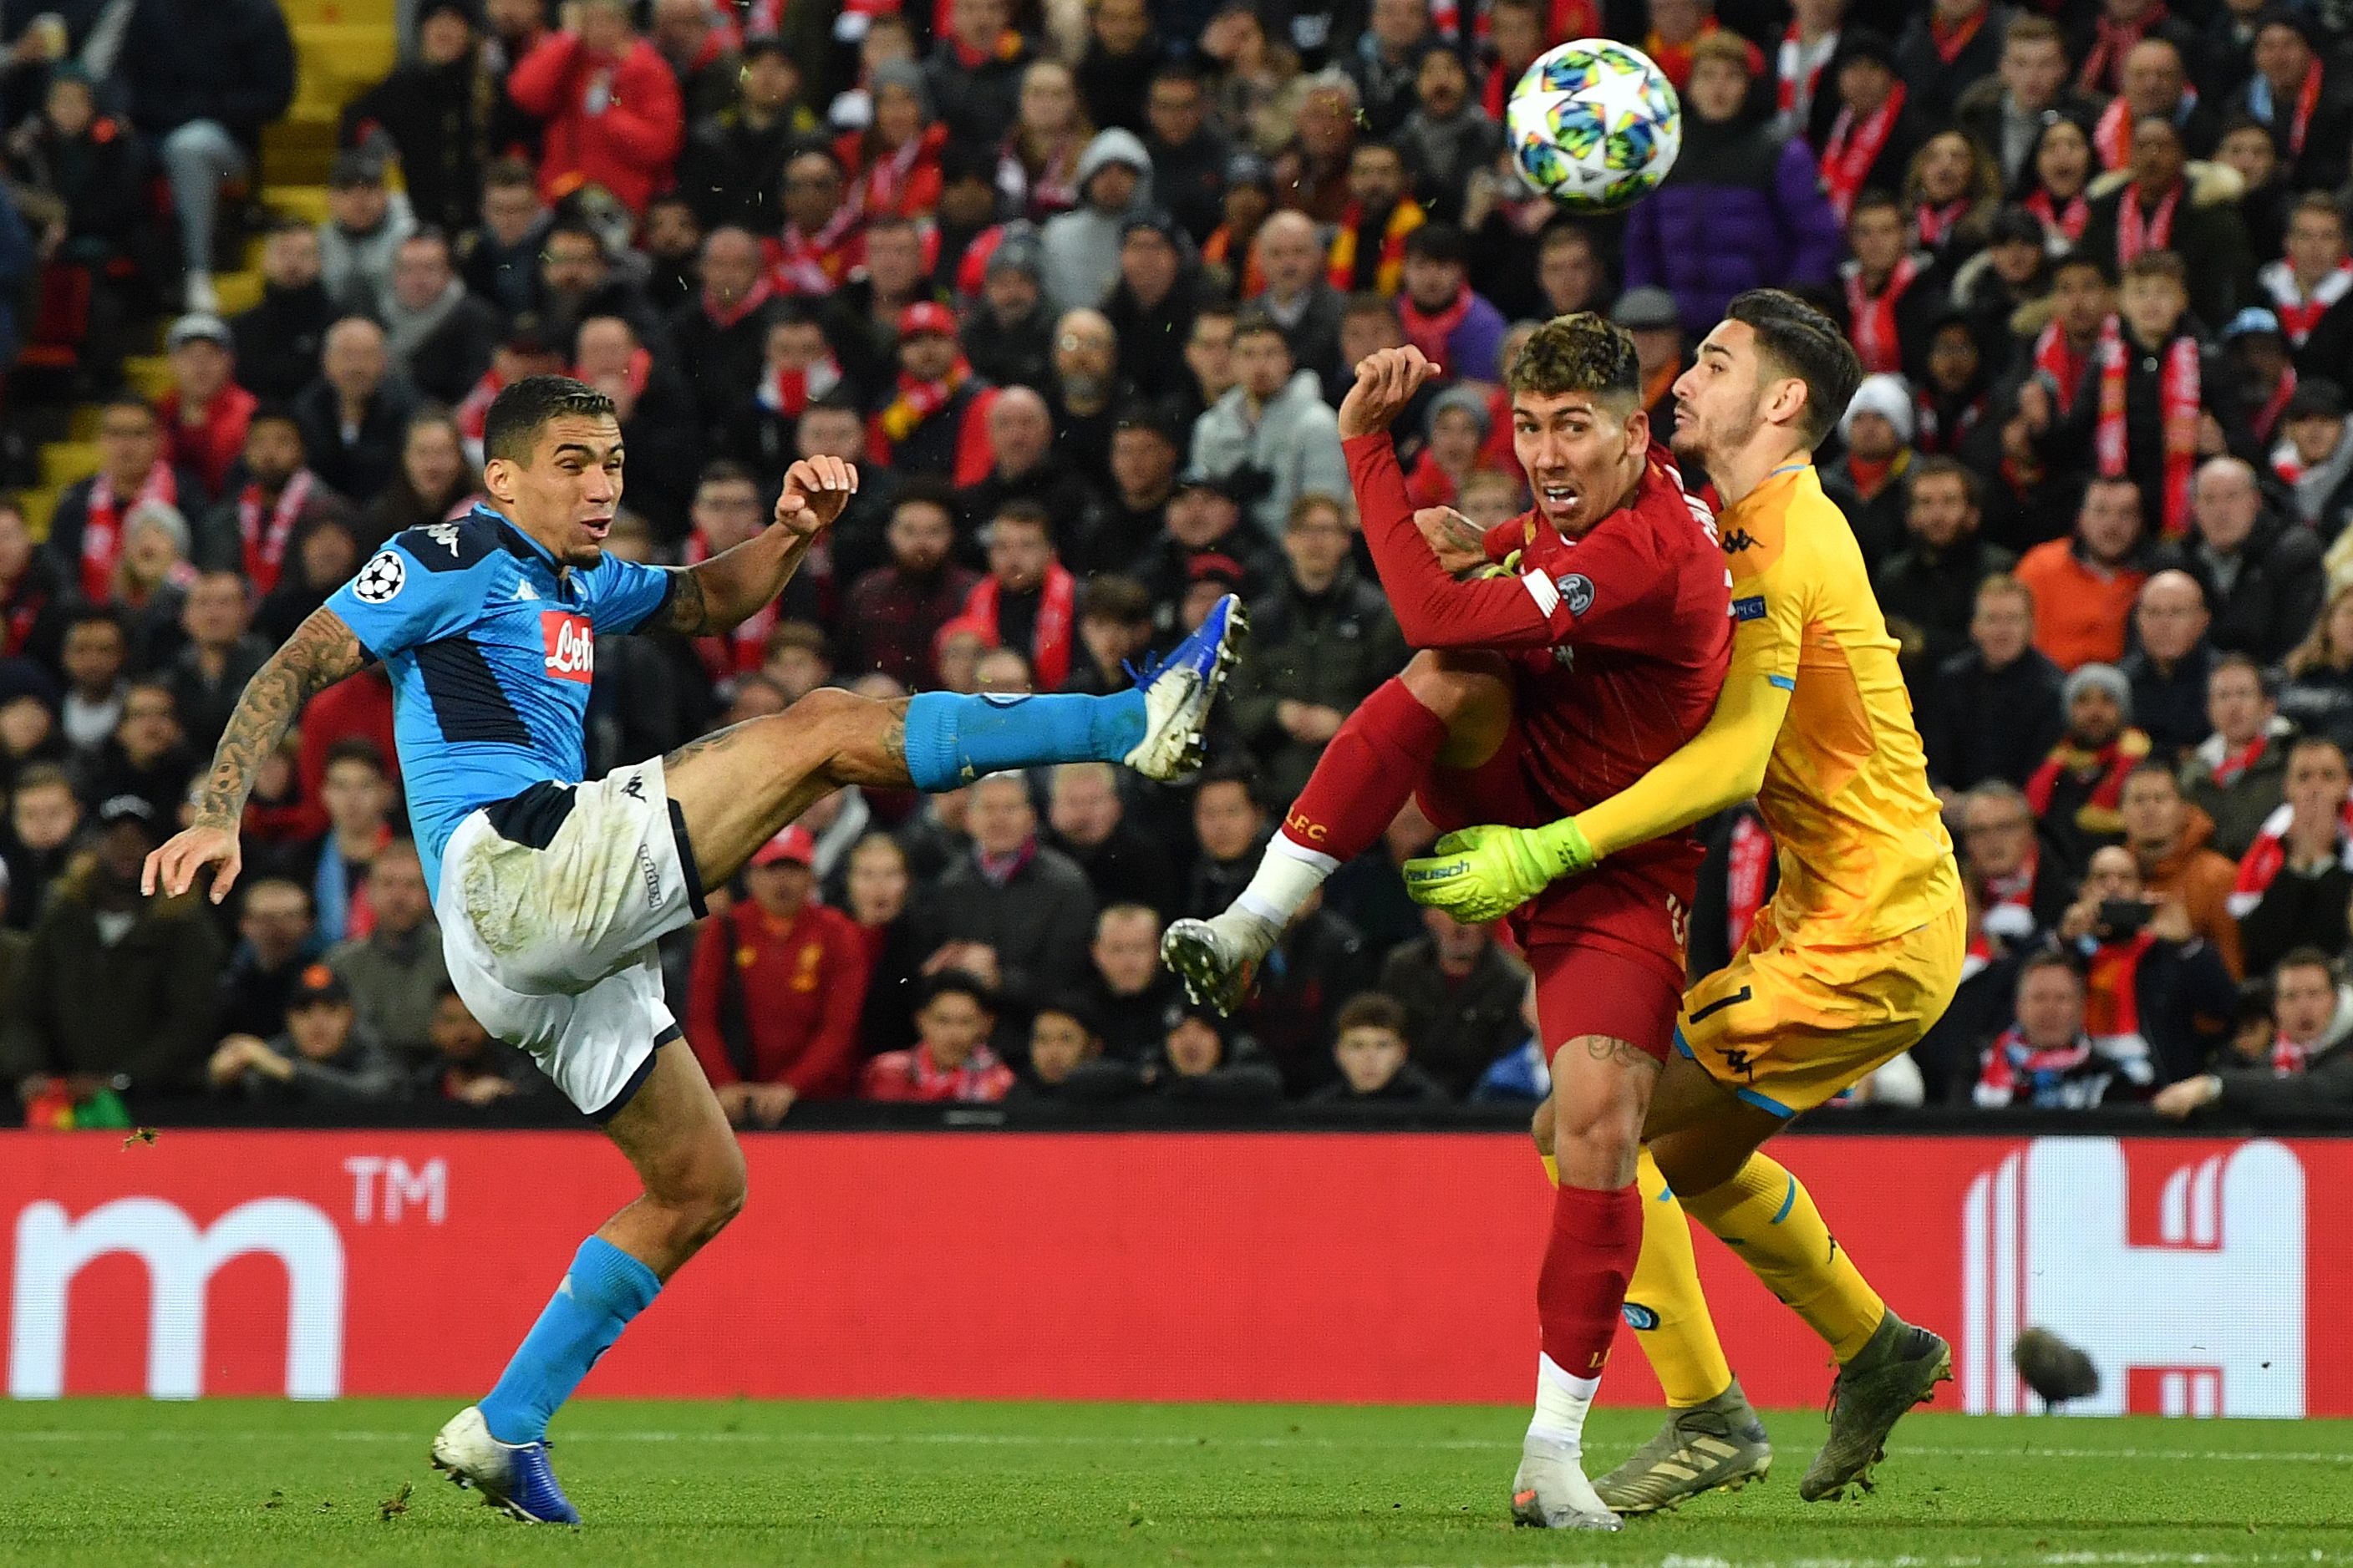 Liverpool's Roberto Firmino had his effort cleared off the line.